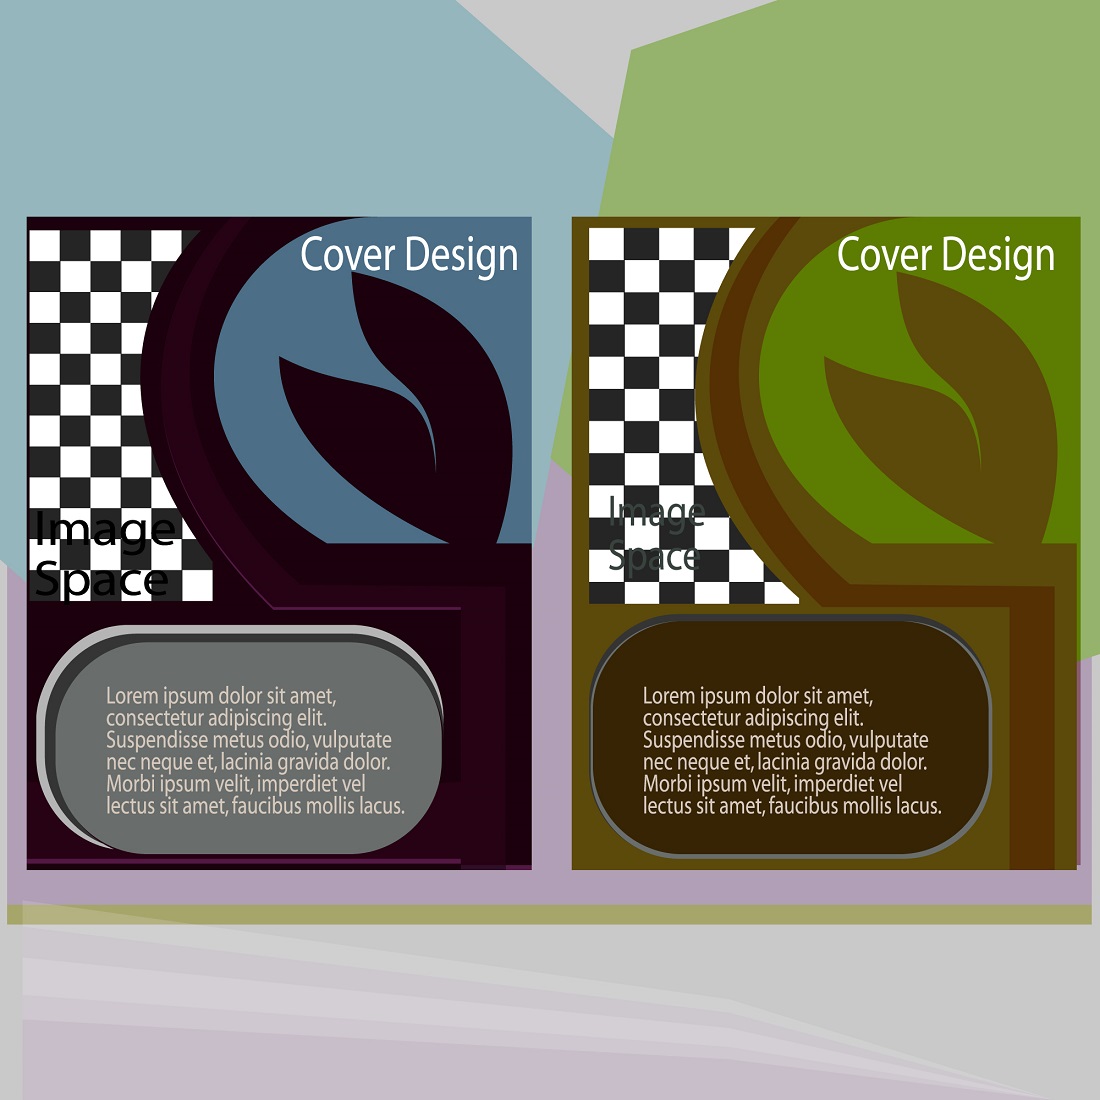 This cover bundle design is prepared for graphics, print and web cover image.